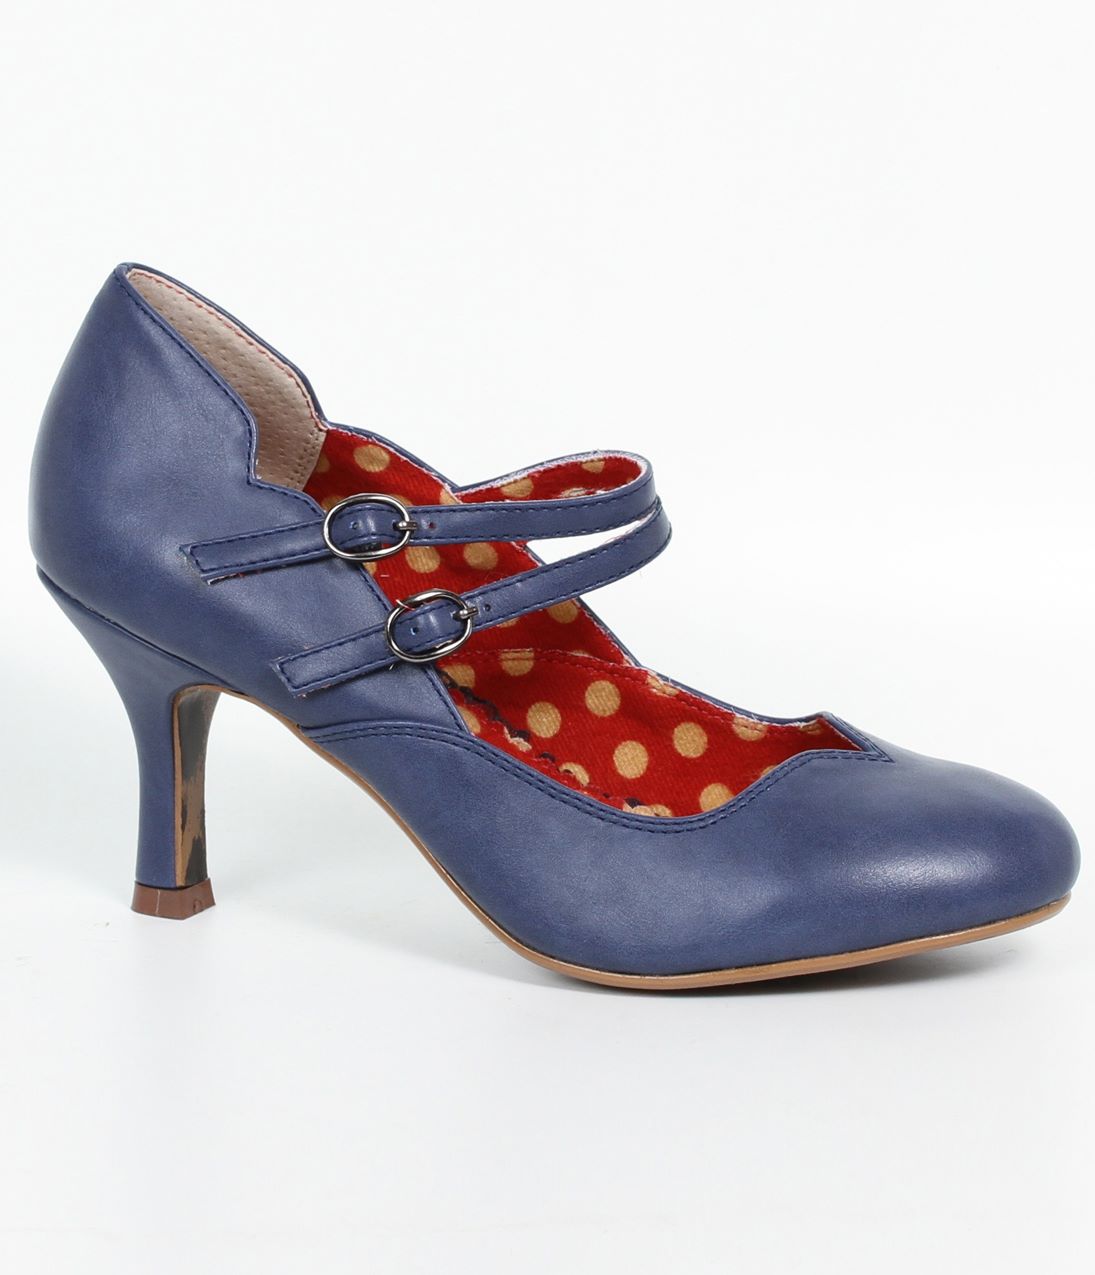 1940s mary jane shoes